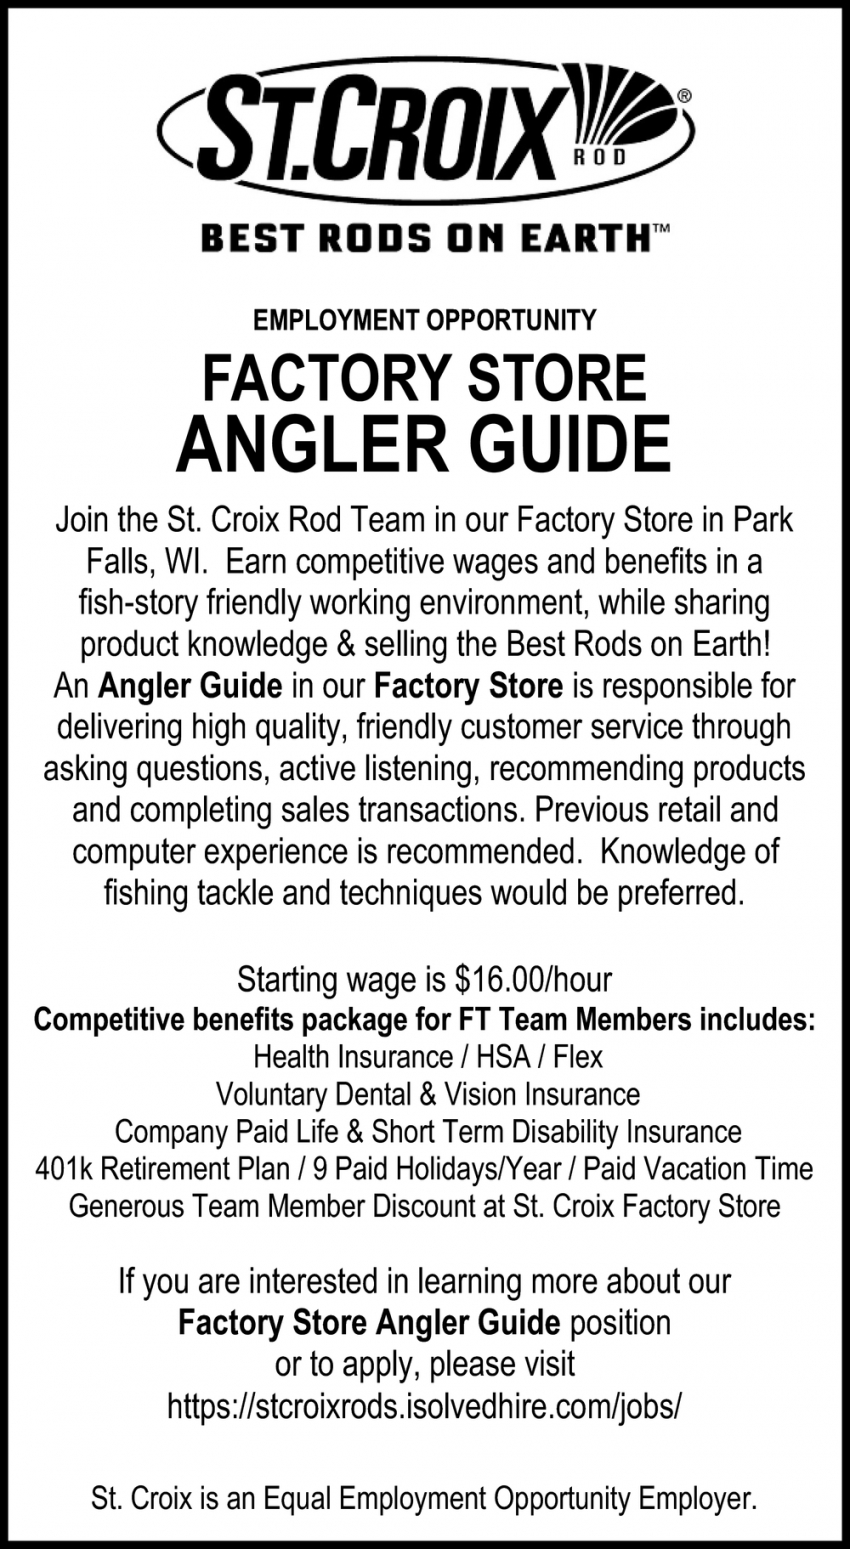 Factory Store Angler Guide, St. Croix Rod, Park Falls, WI